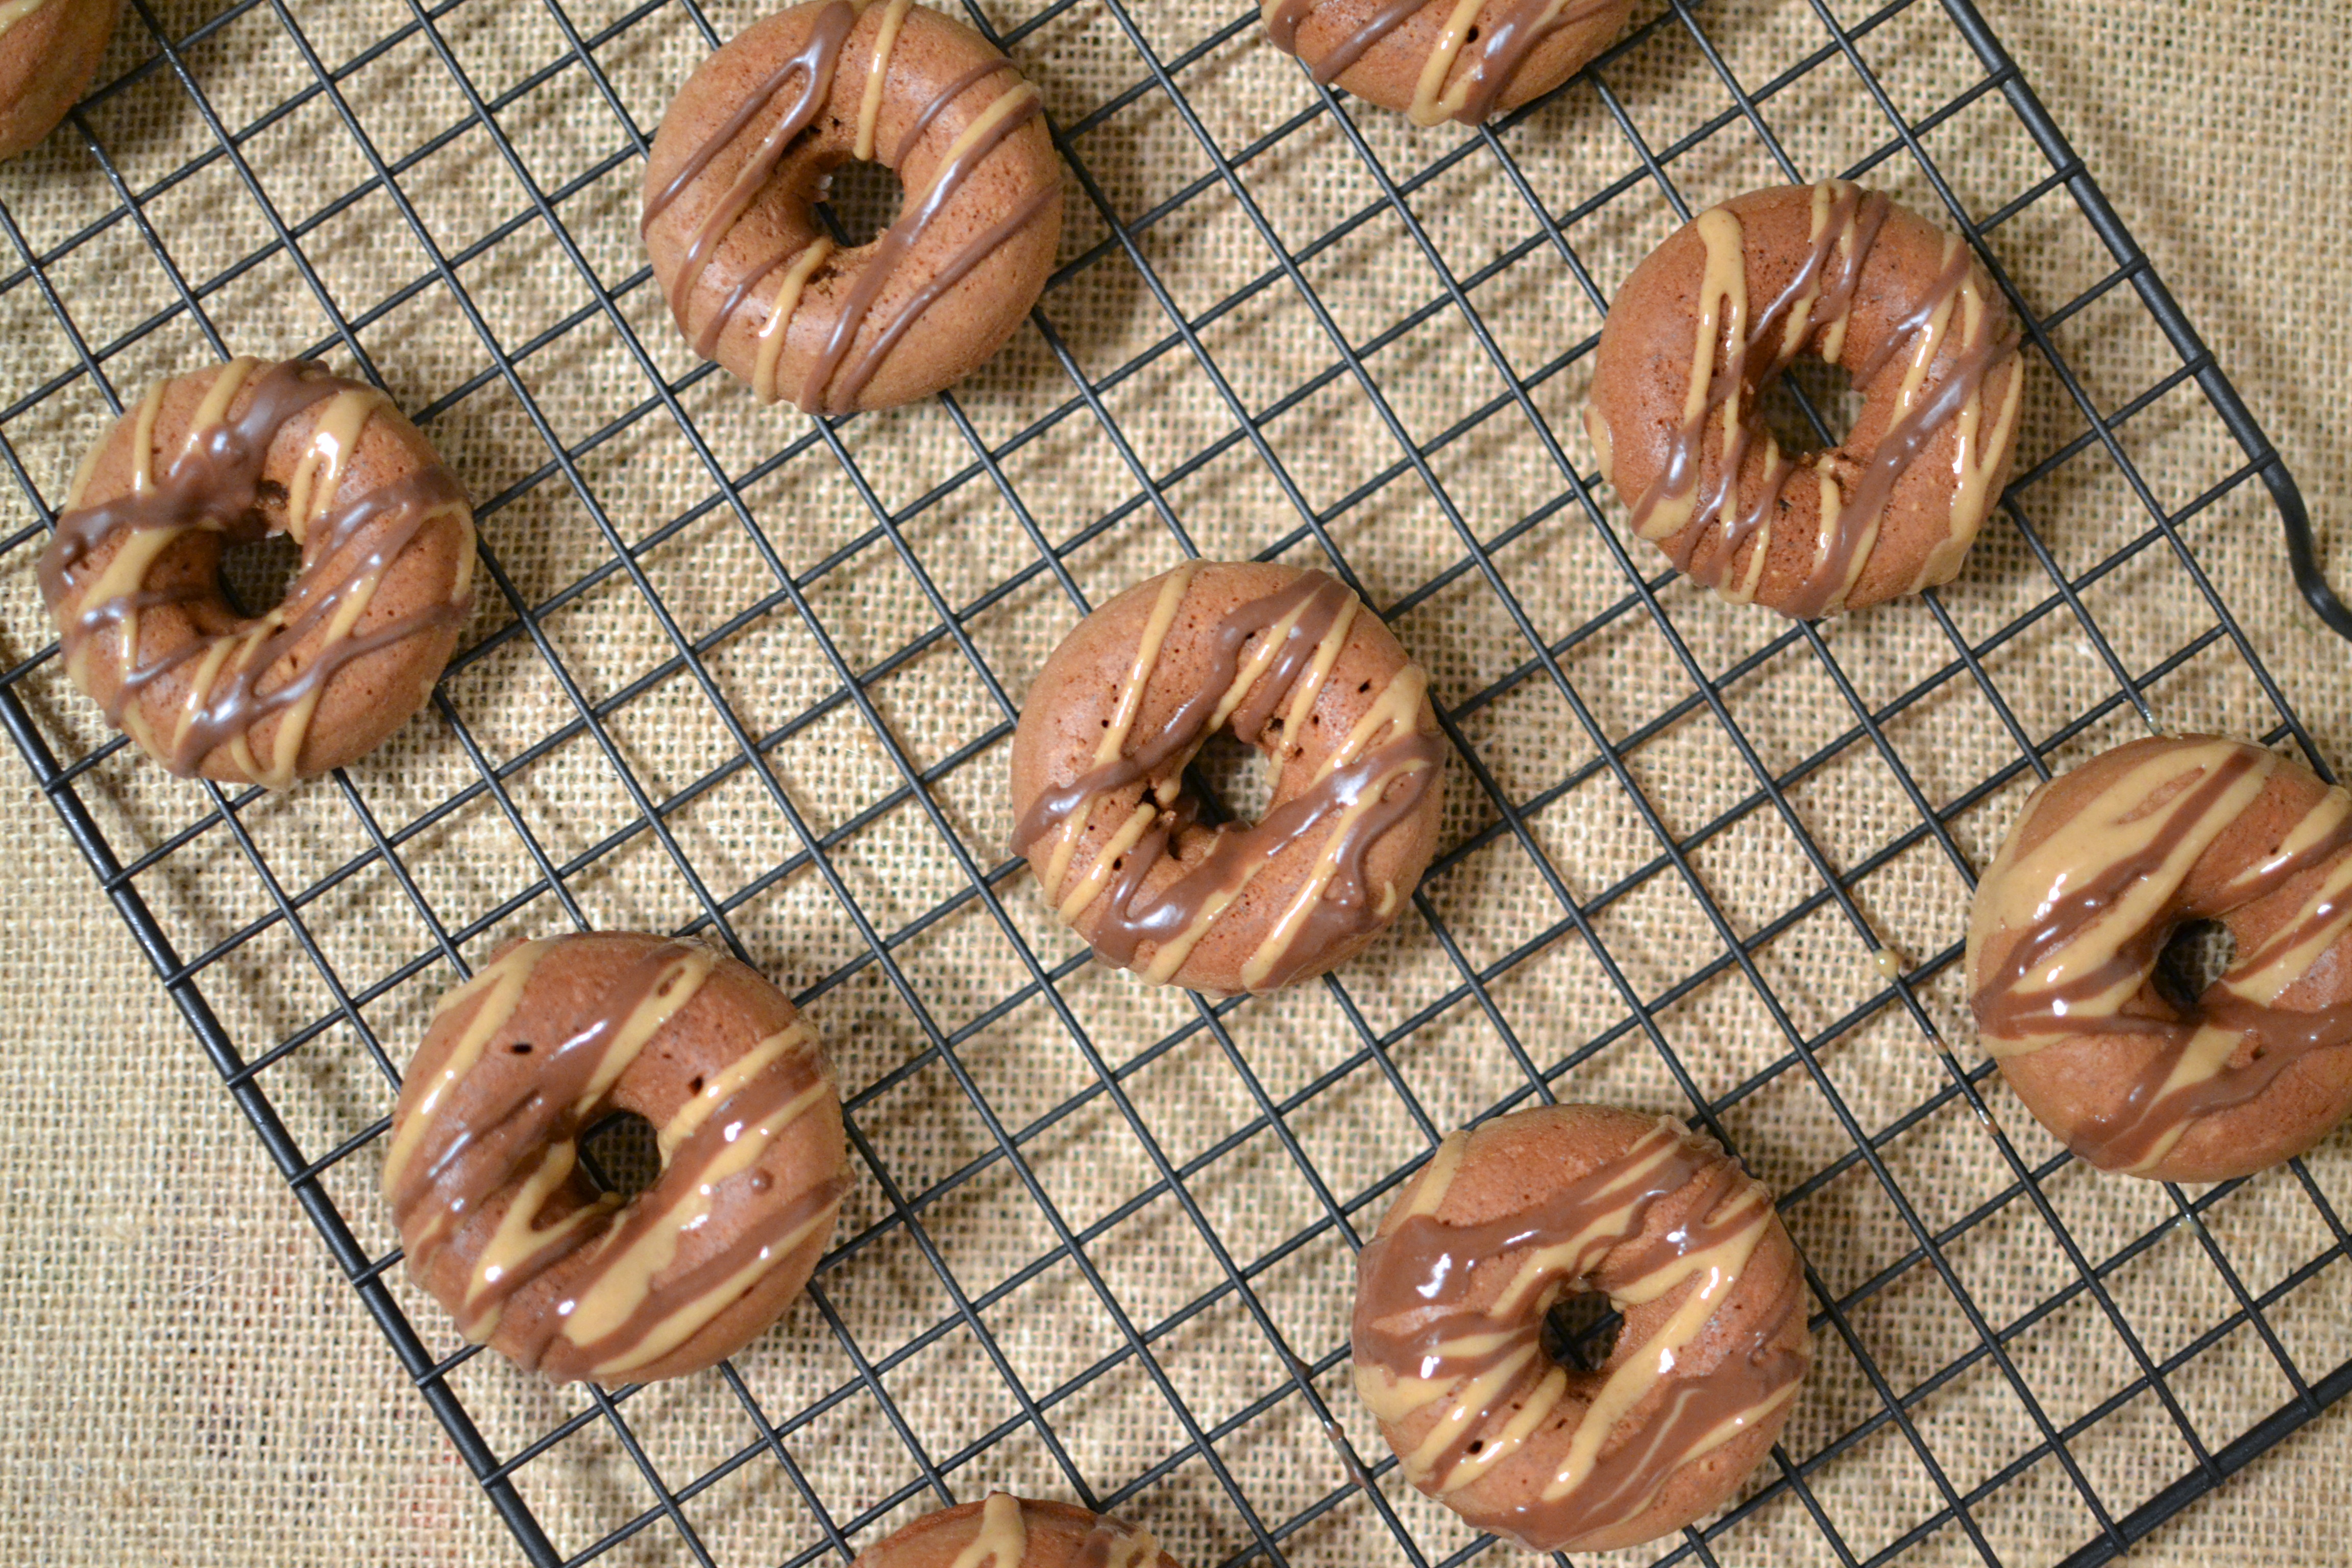 Paleo Chocolate Donuts with Carob and Nut Butter Drizzle